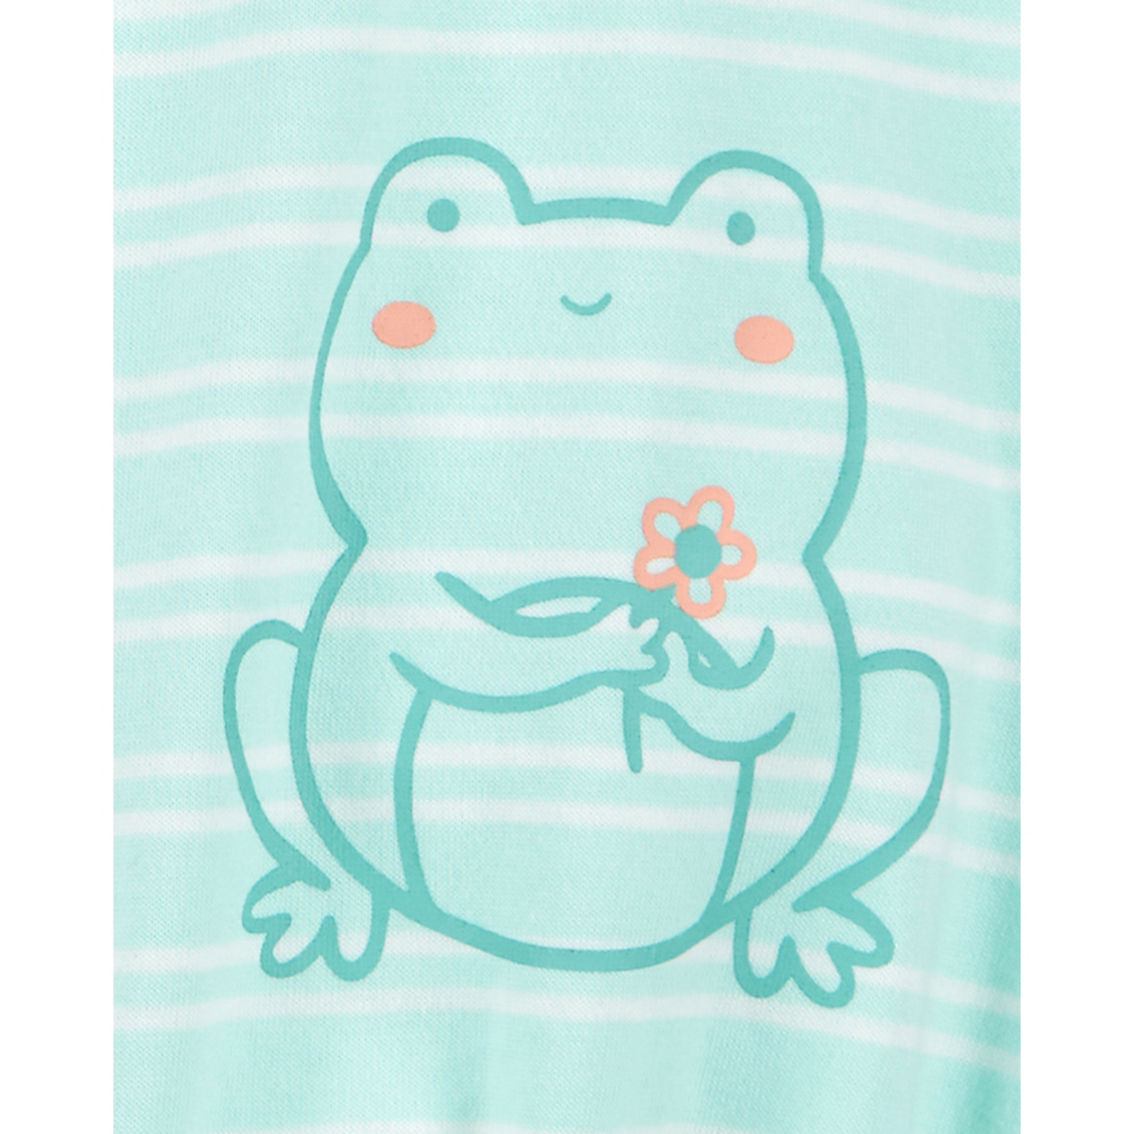 Carter's Baby Girls Striped Frog Cotton Romper - Image 2 of 2